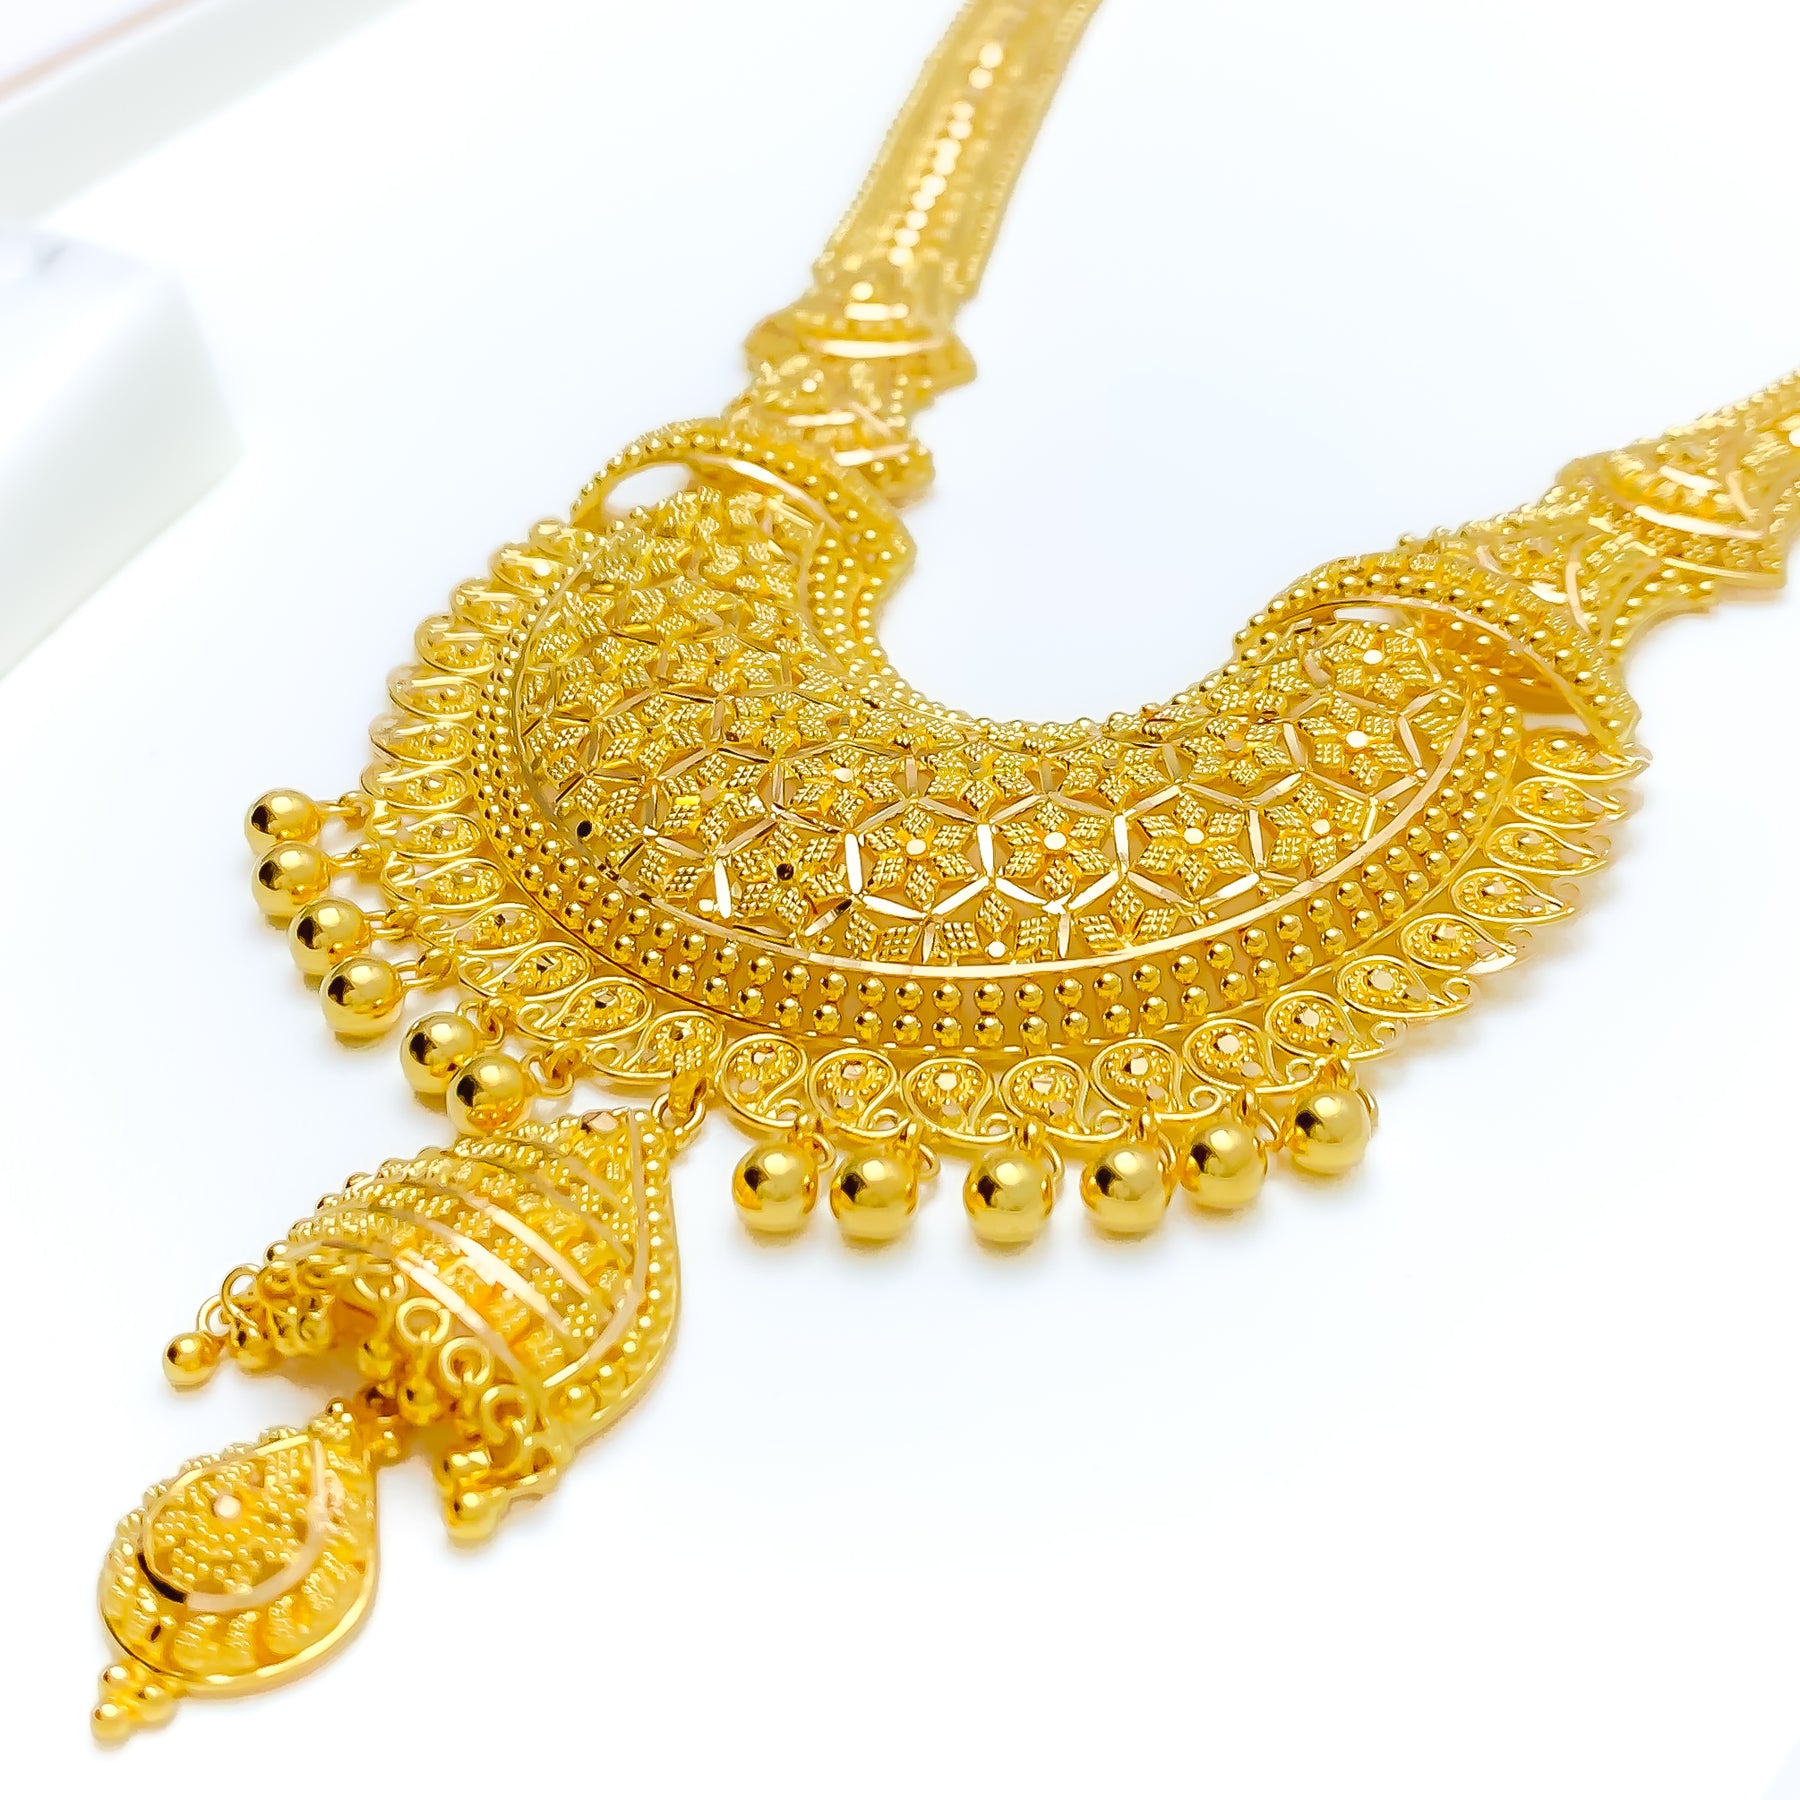 22K Gold Temple Jewellery Necklaces -Indian Gold Jewelry -Buy Online